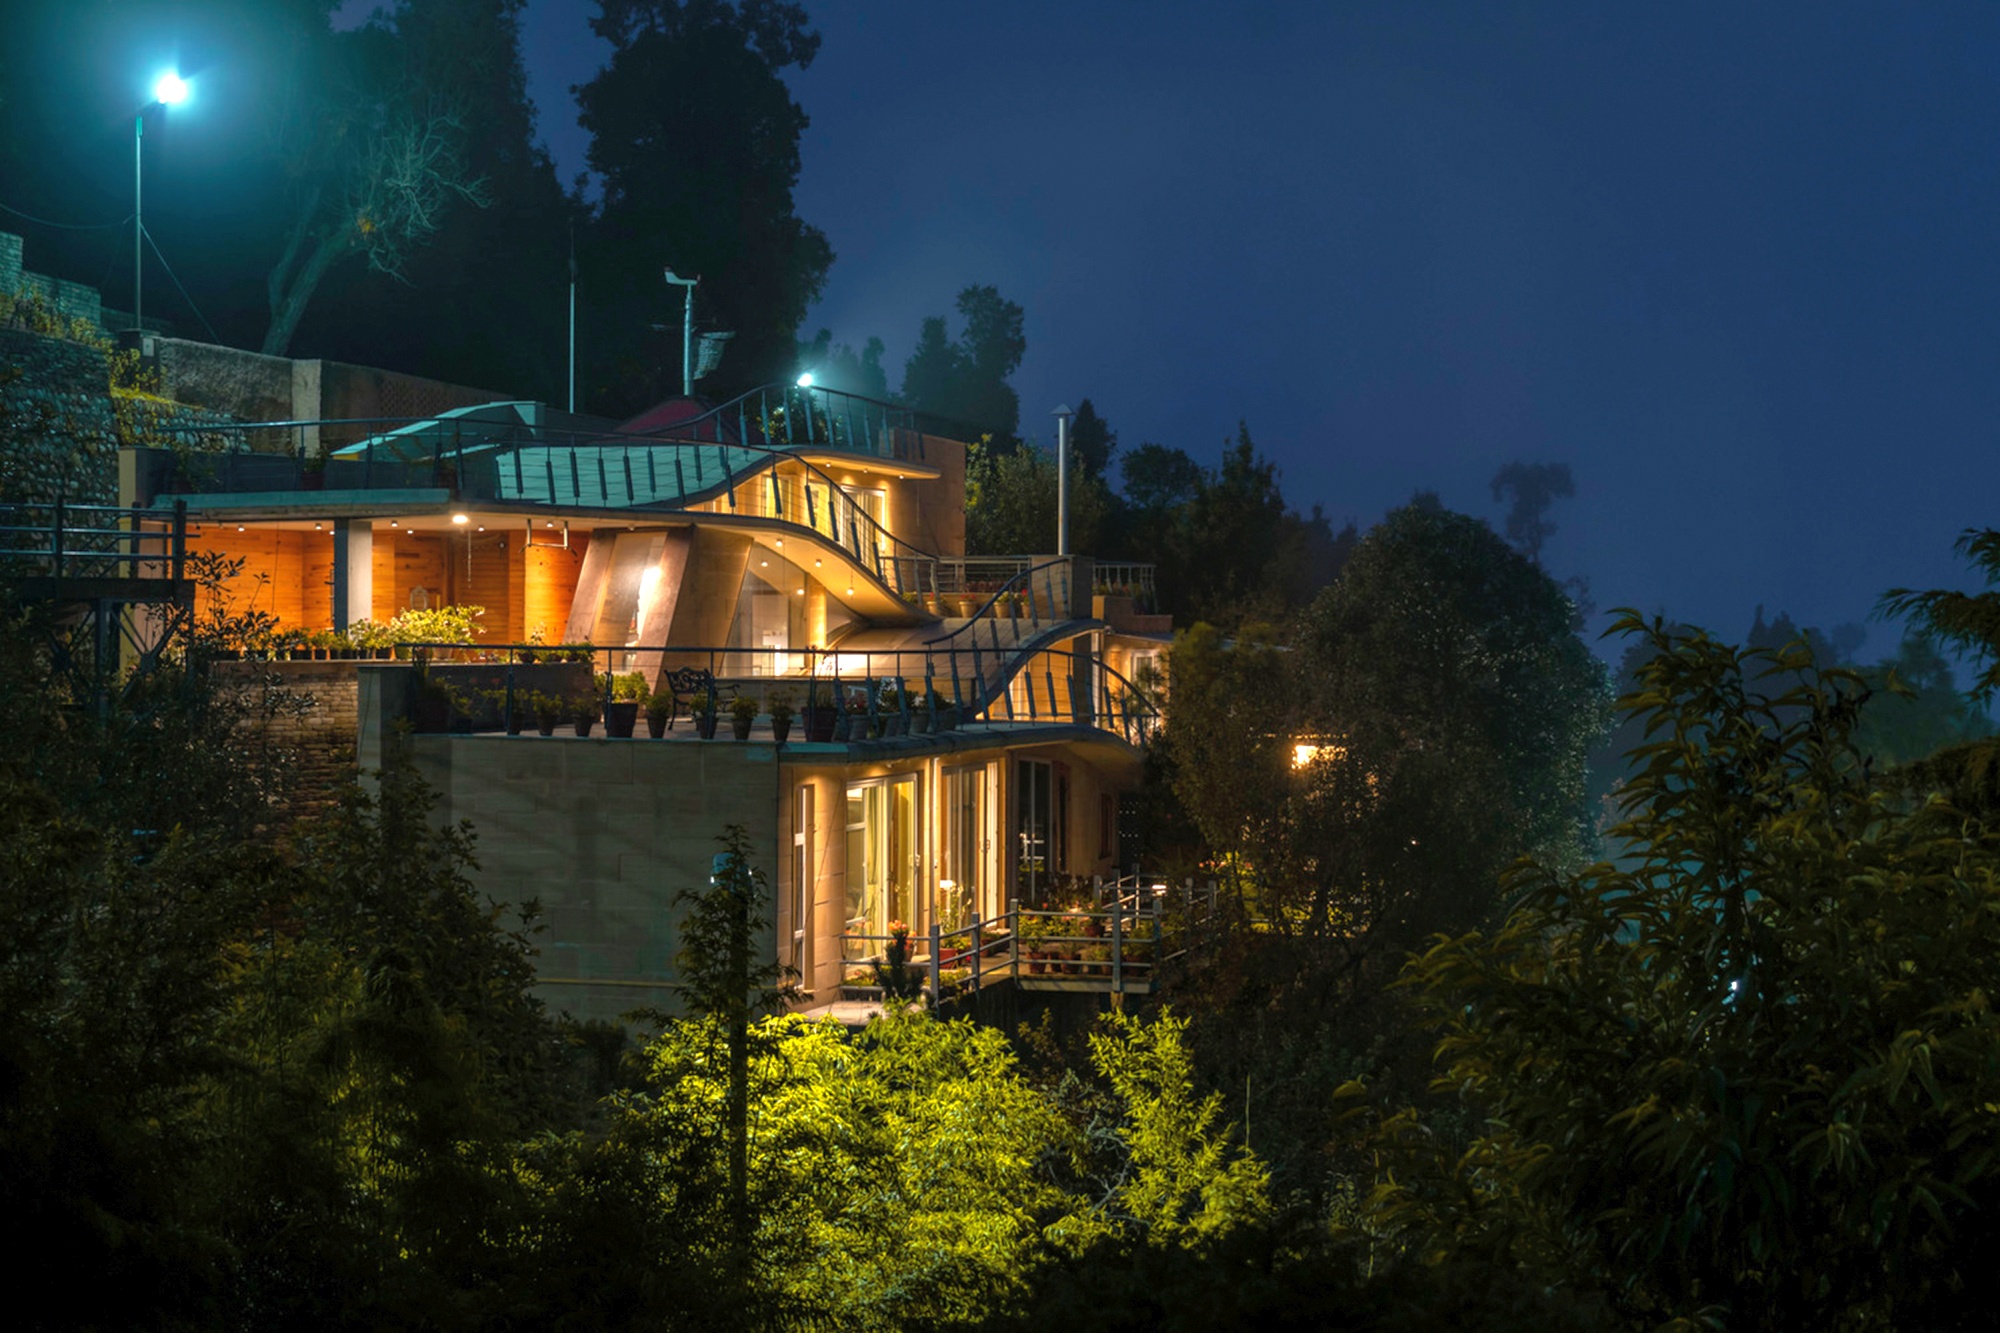 In the Mountains, Mukteshwar, by ANT Studio